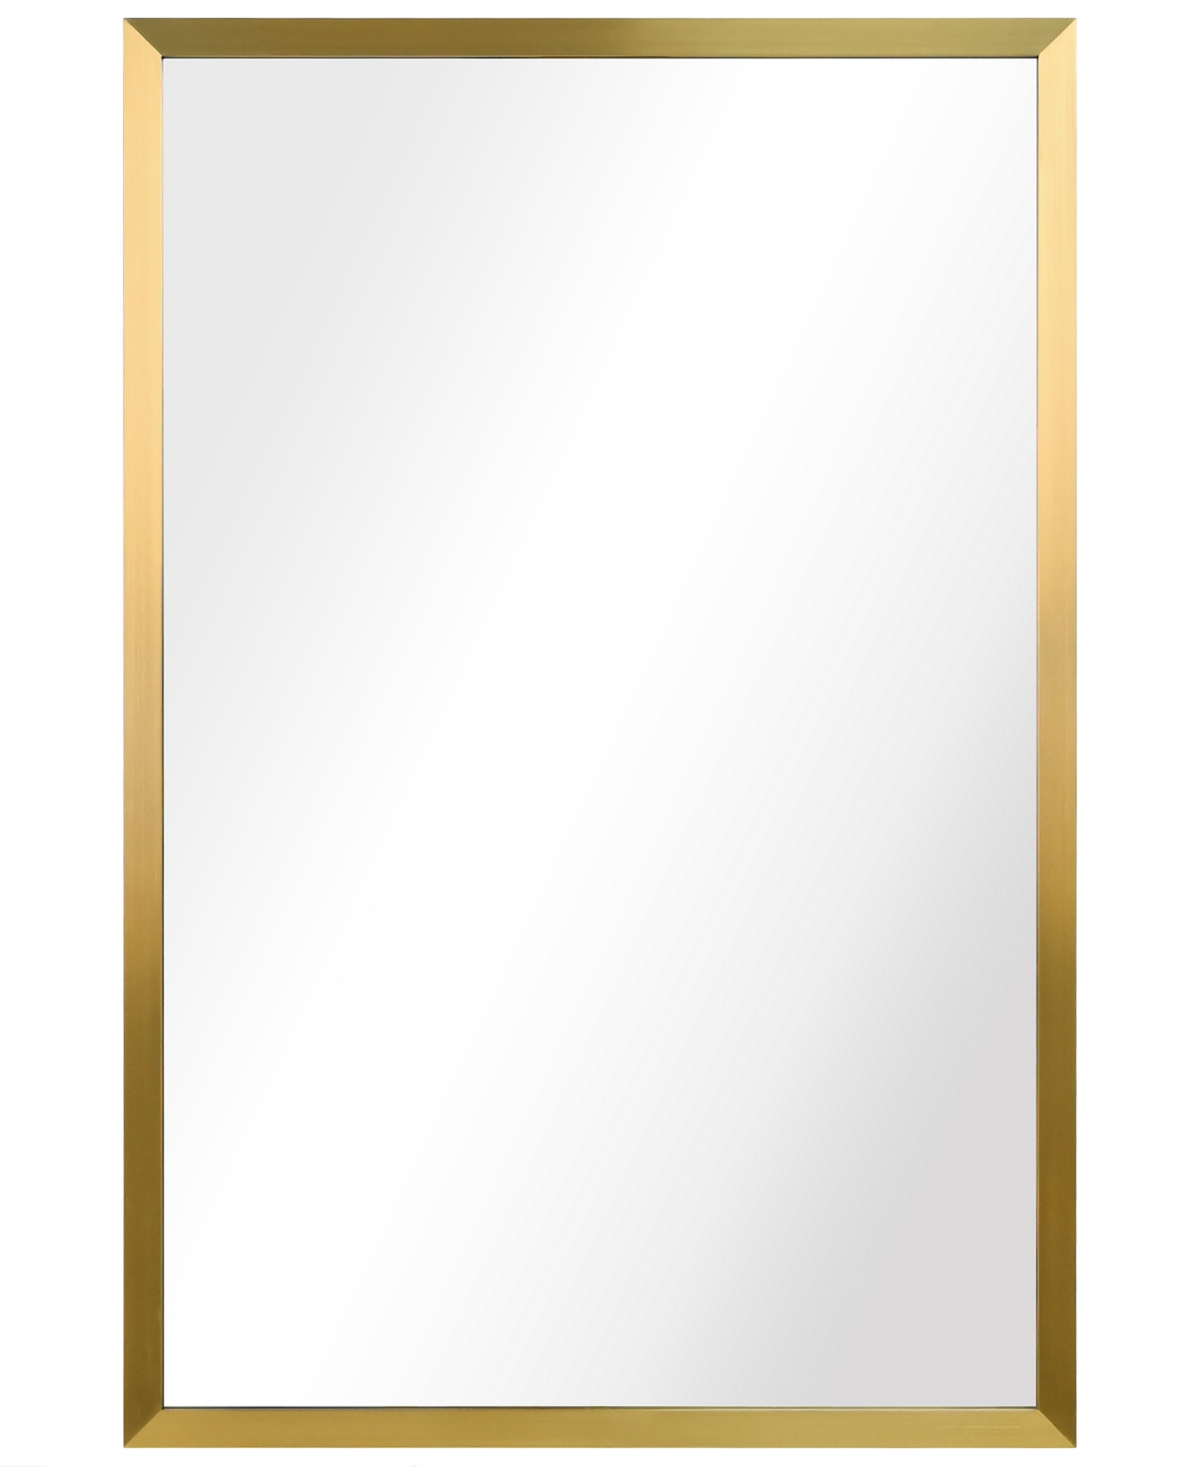 Contempo Brushed Stainless Steel Rectangular Wall Mirror, 24" x 36" - Gold-Tone